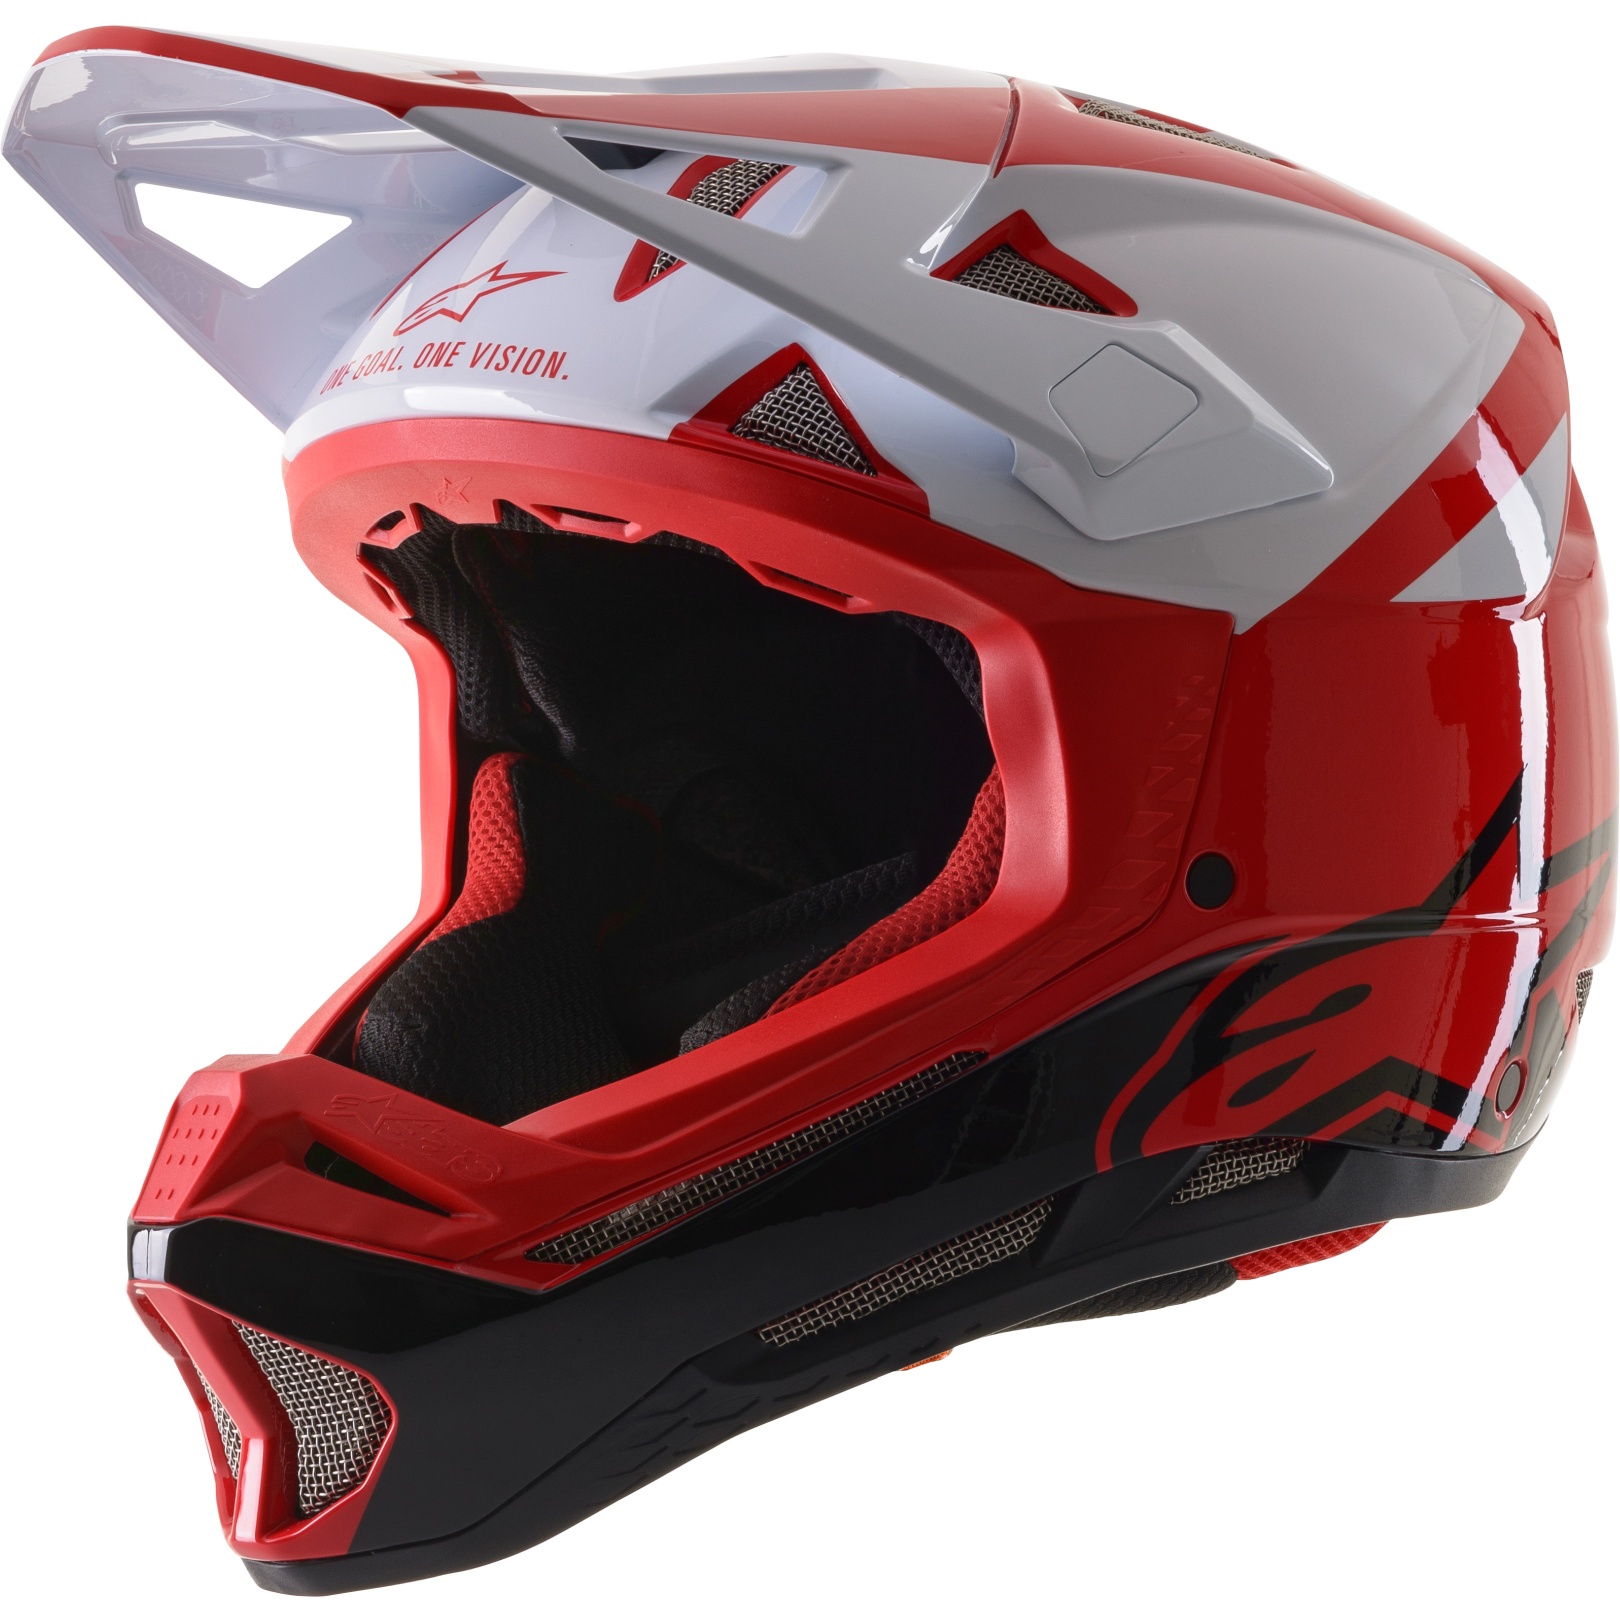 Image of Alpinestars Missile Pro Helmet - Cosmos - red/white glossy